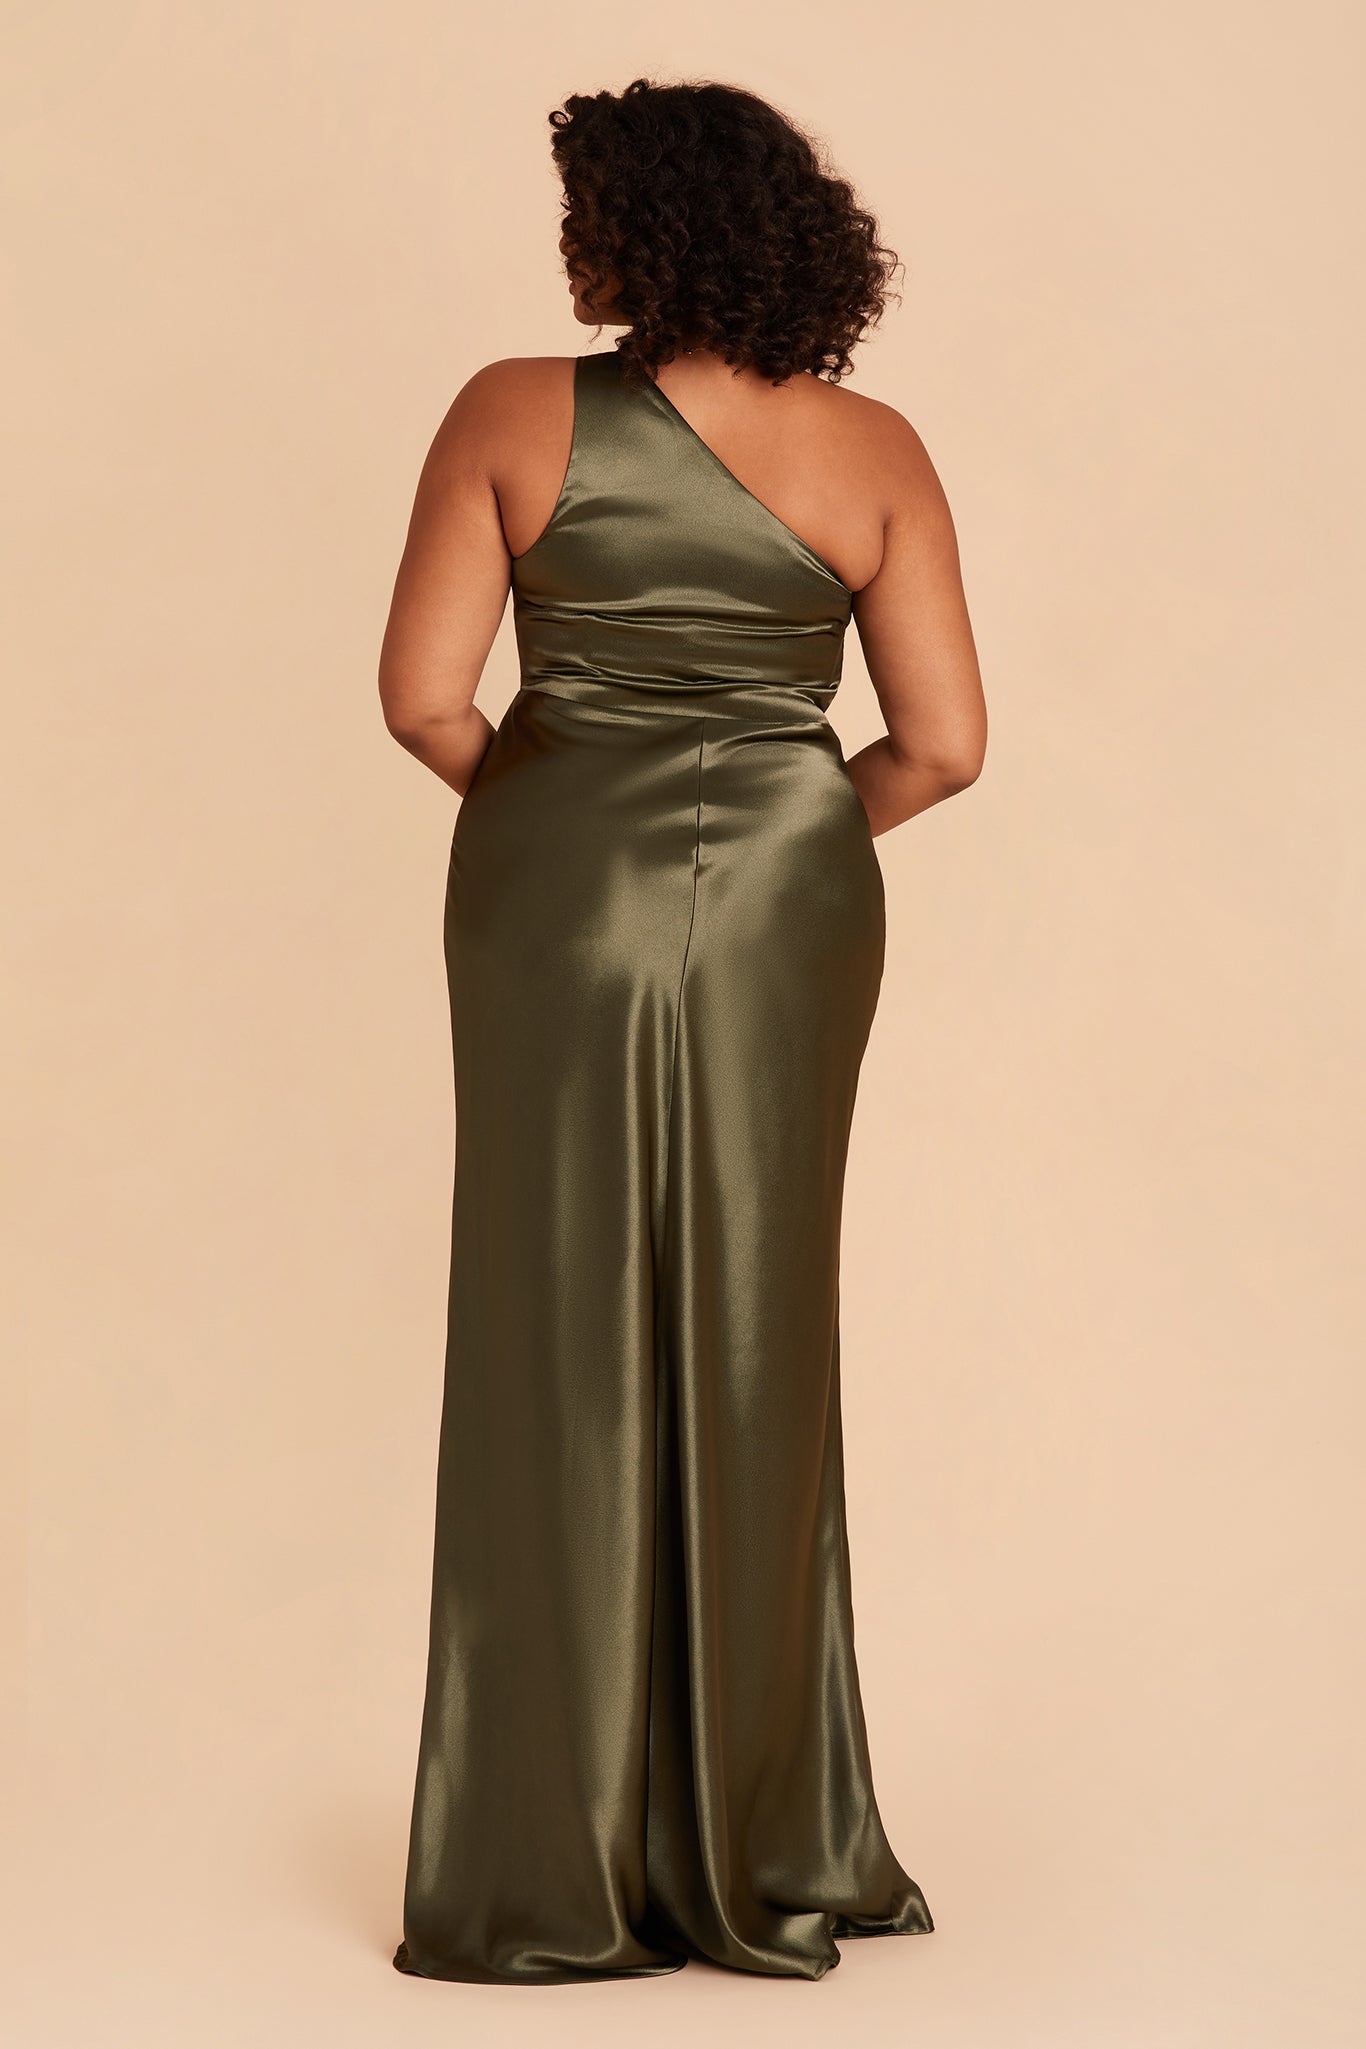 Kira plus size bridesmaid dress with slit in olive satin by Birdy Grey, back view